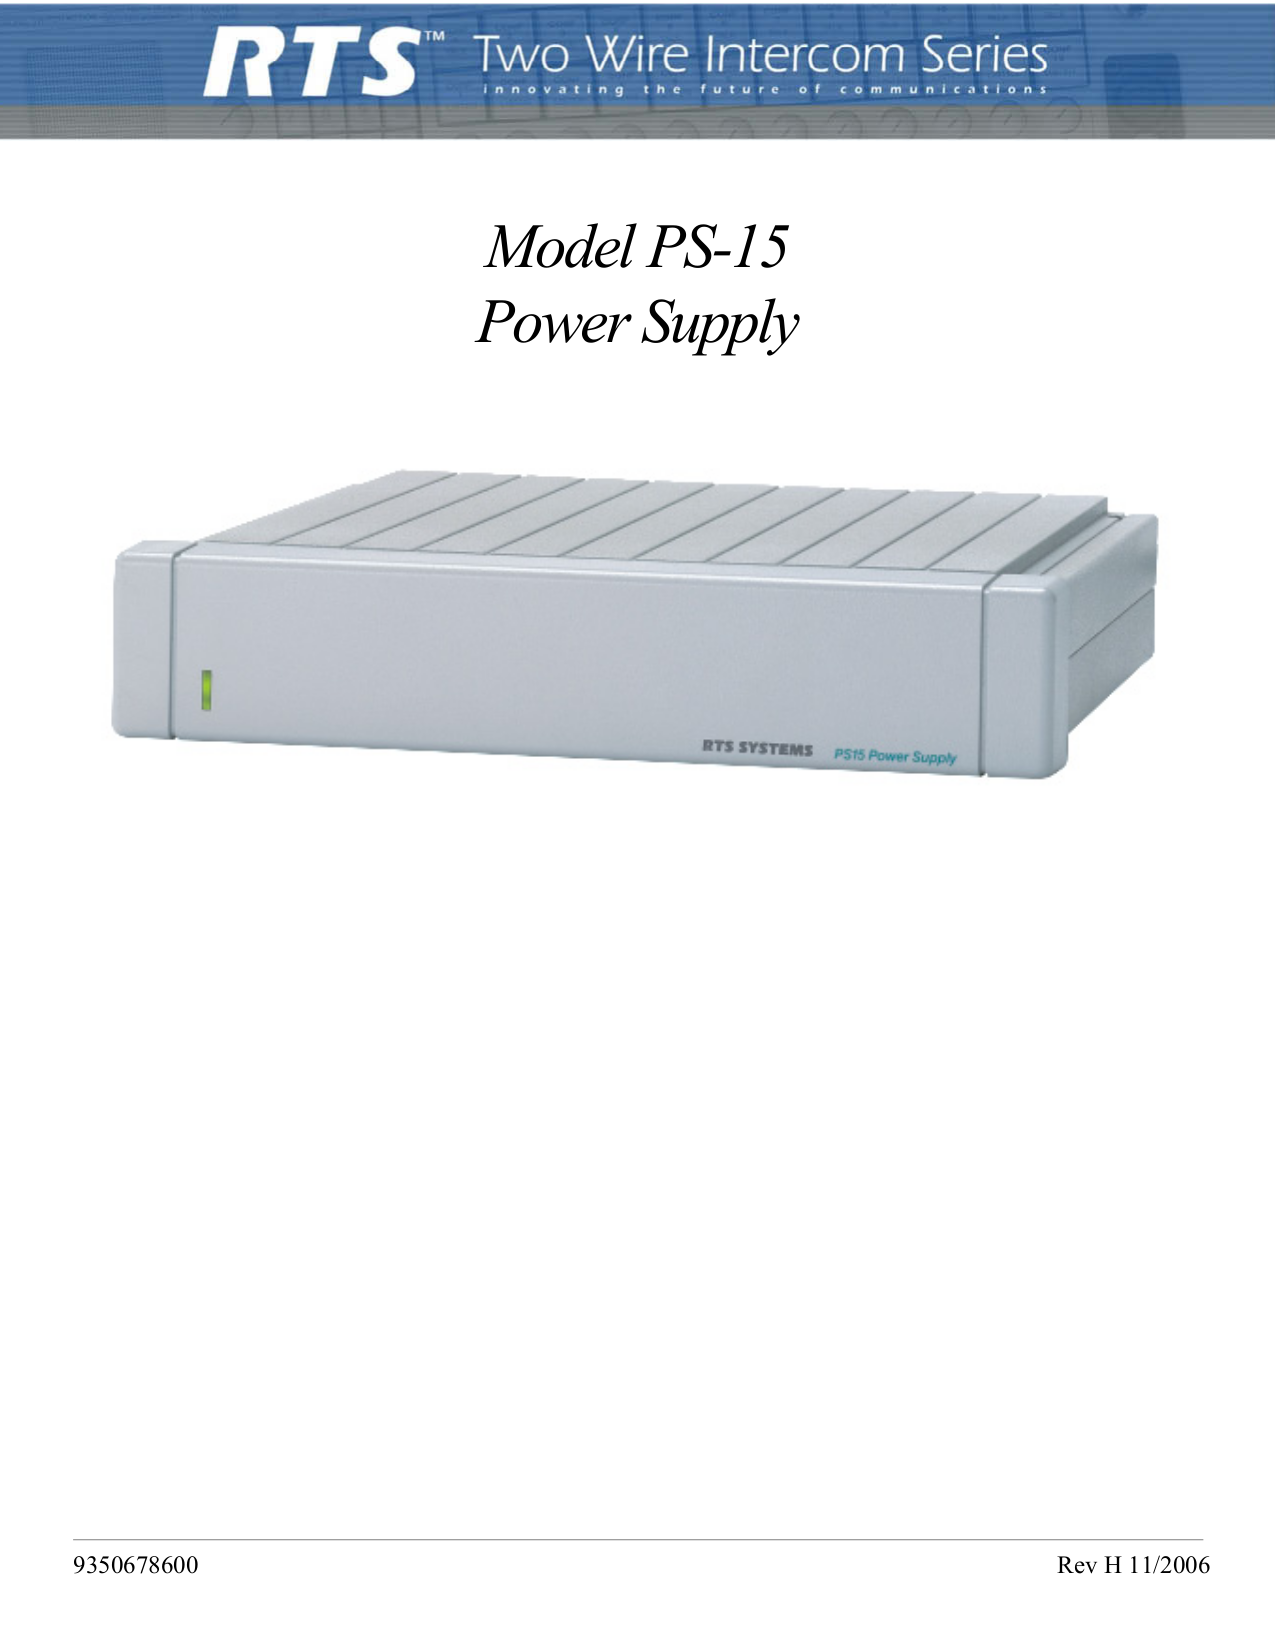 pdf for Telex Other CM300 Console Mount User Station manual